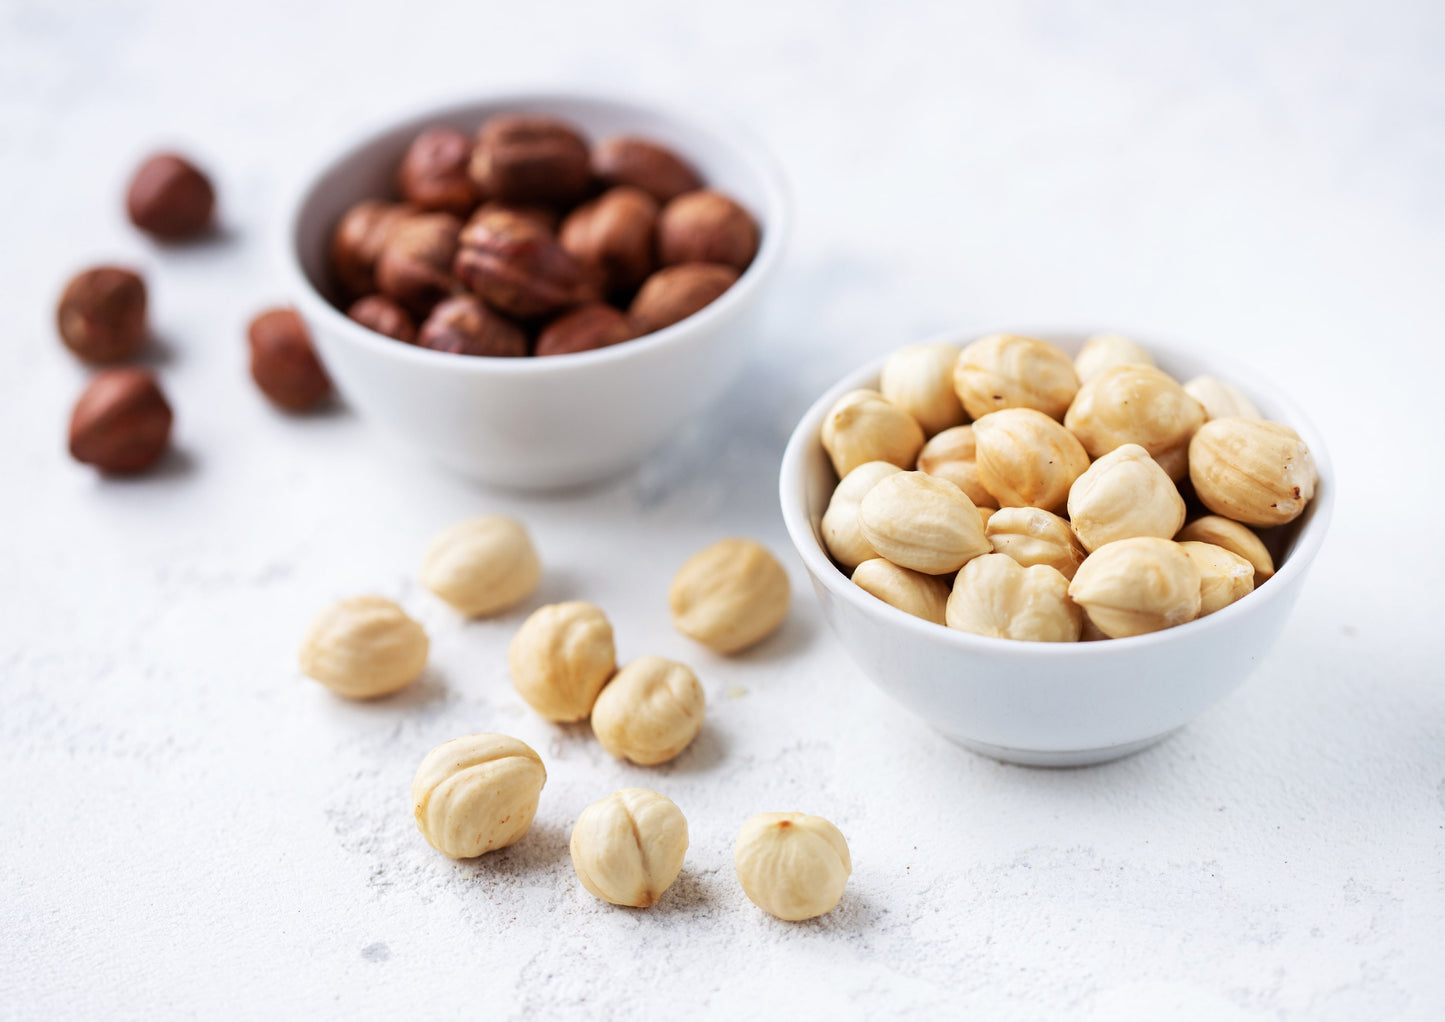 Blanched Hazelnuts – Raw Whole Filberts, No Skin, Unsalted, Unroasted Nuts, Vegan Snack, Kosher, Bulk. Keto. Good Source of Vitamins and Protein. Great for Baking, Granola & Butter Making